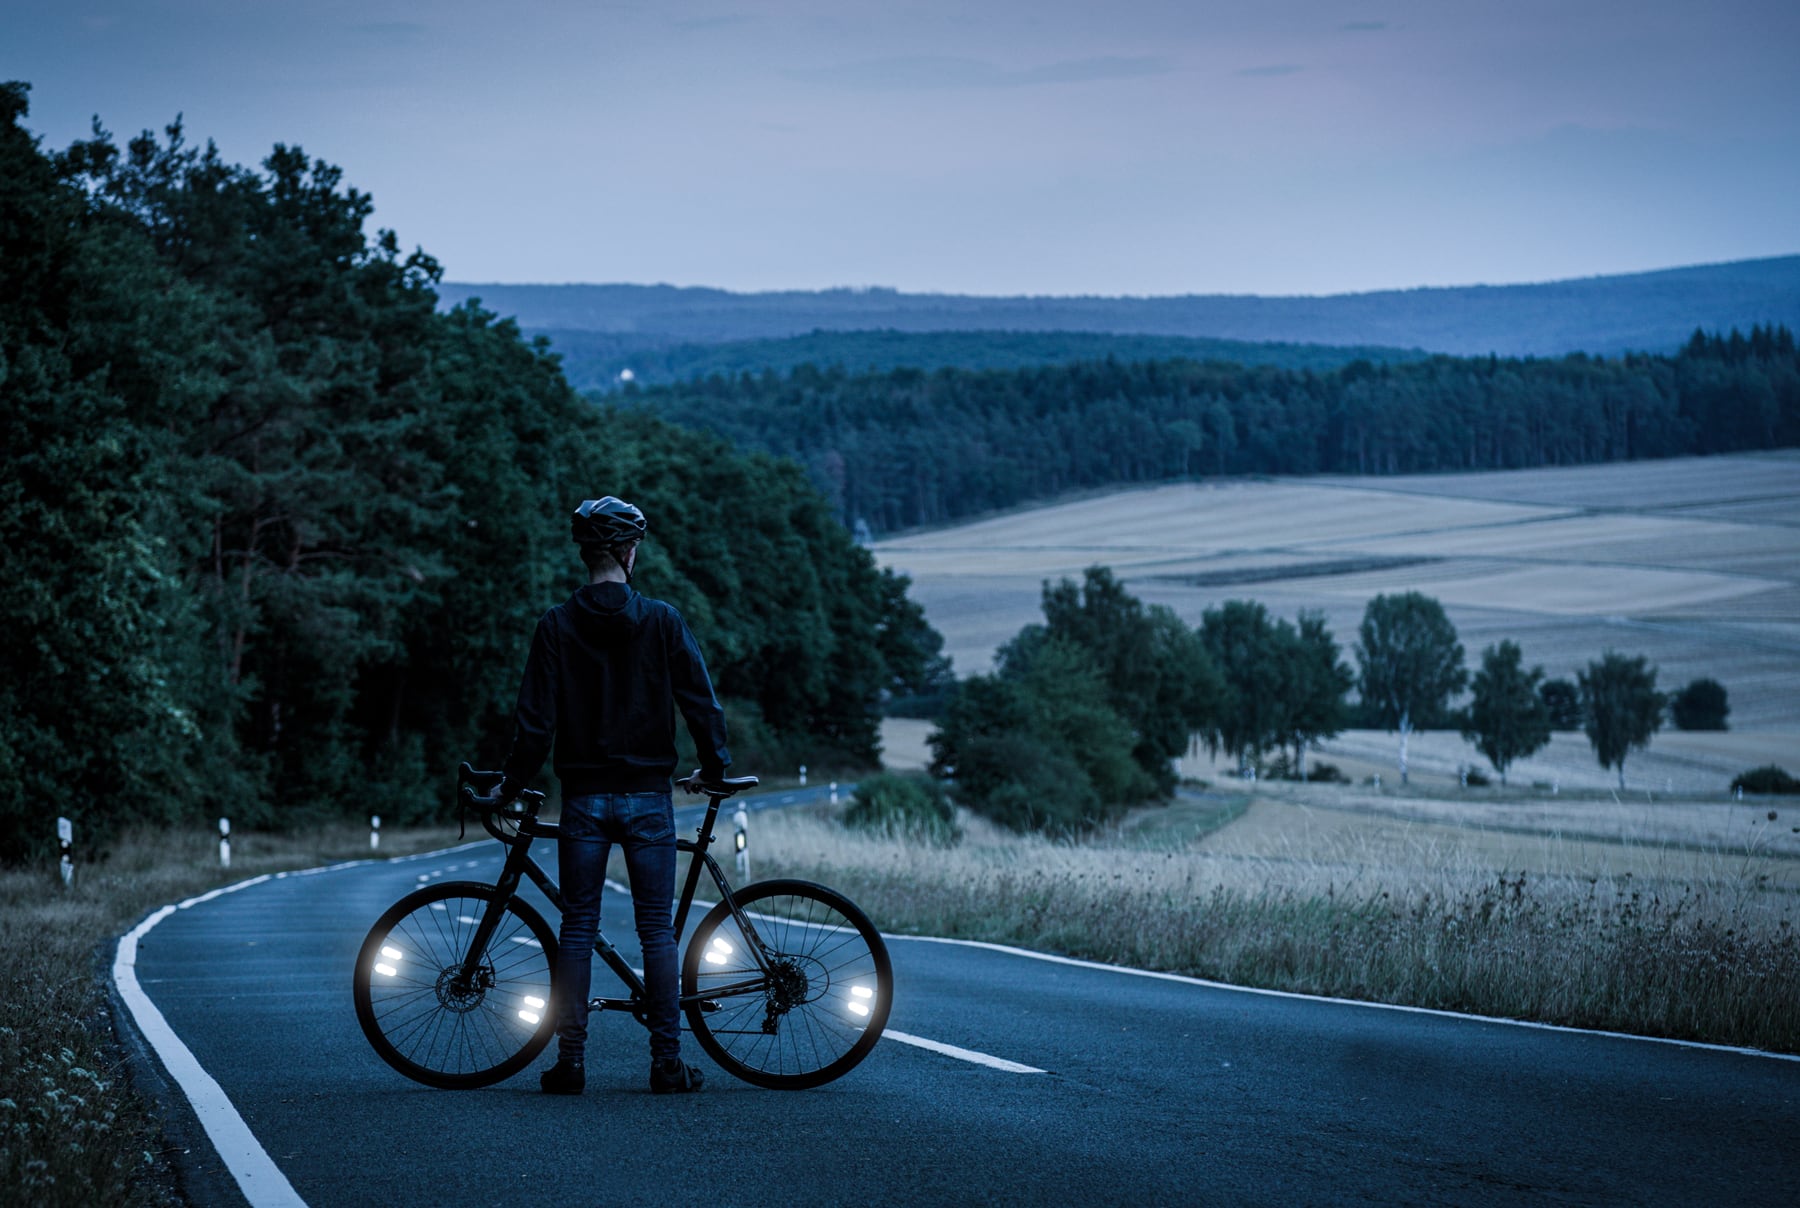 FLECTR ZERO spoke reflector – ride safely with style